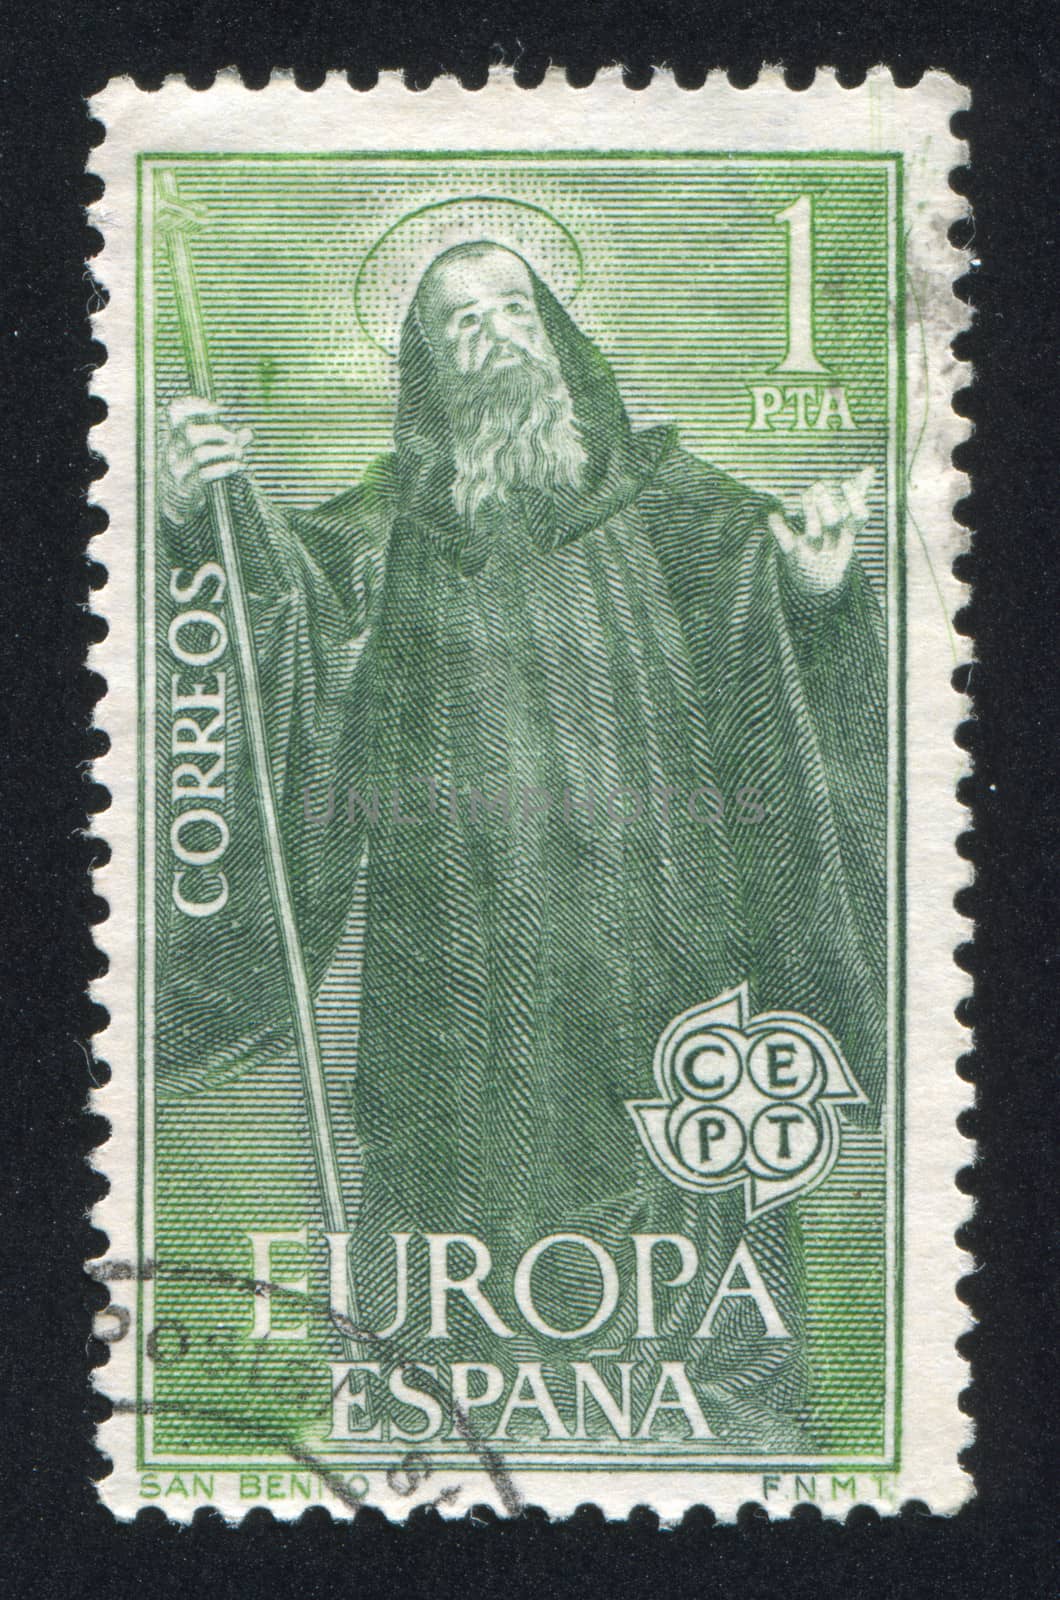 SPAIN - CIRCA 1965: stamp printed by Spain, shows St. Benedict, circa 1965